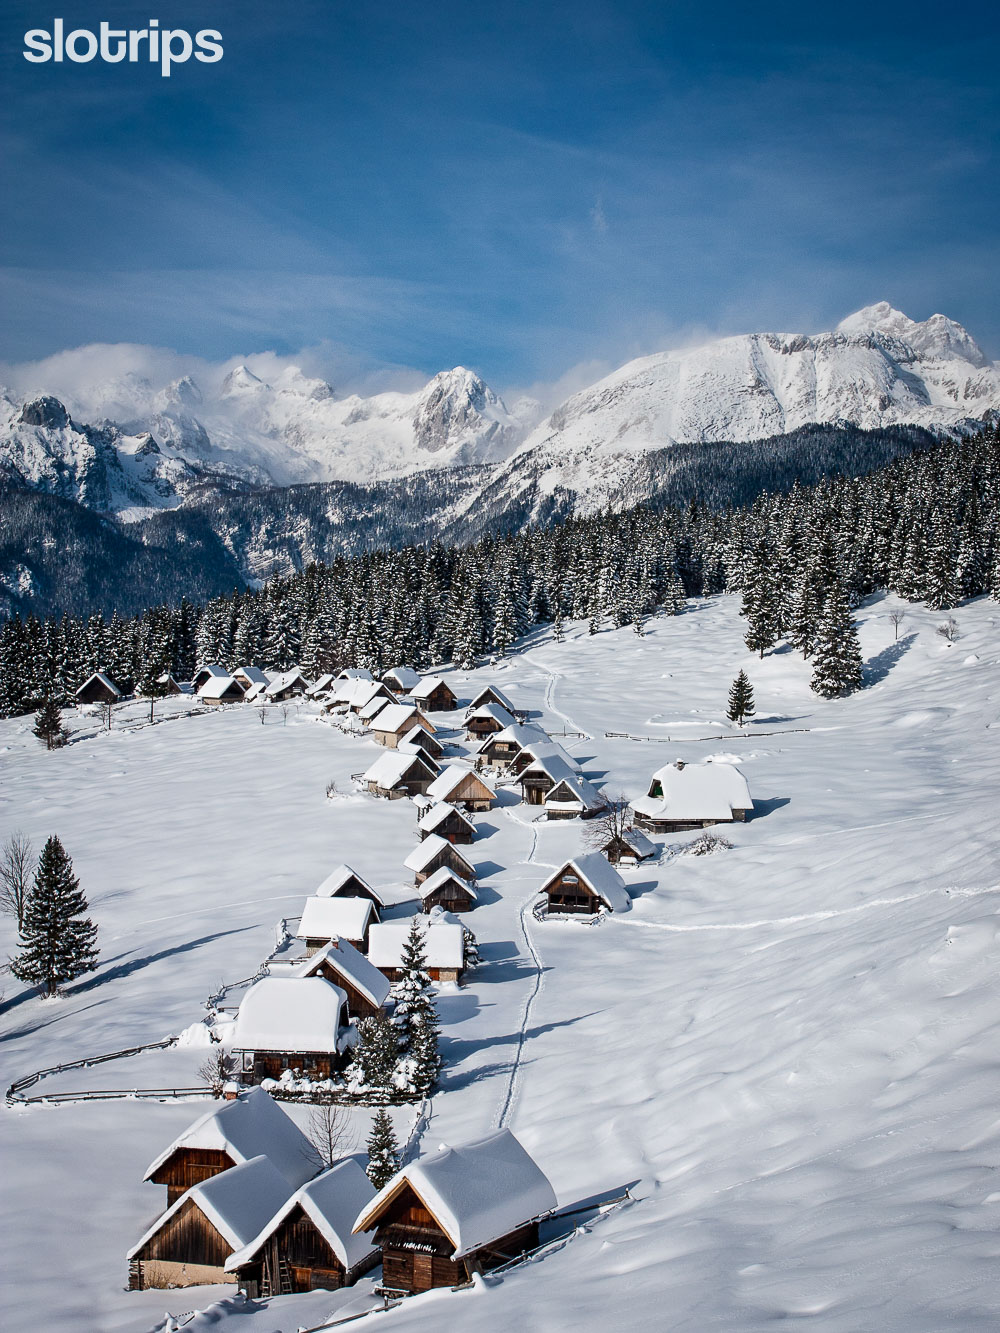 Winter hiking trip views of the snow caped traditional shepherd's cabins on the pastures of Pokljuka plateau with the Julian Alps in the background.